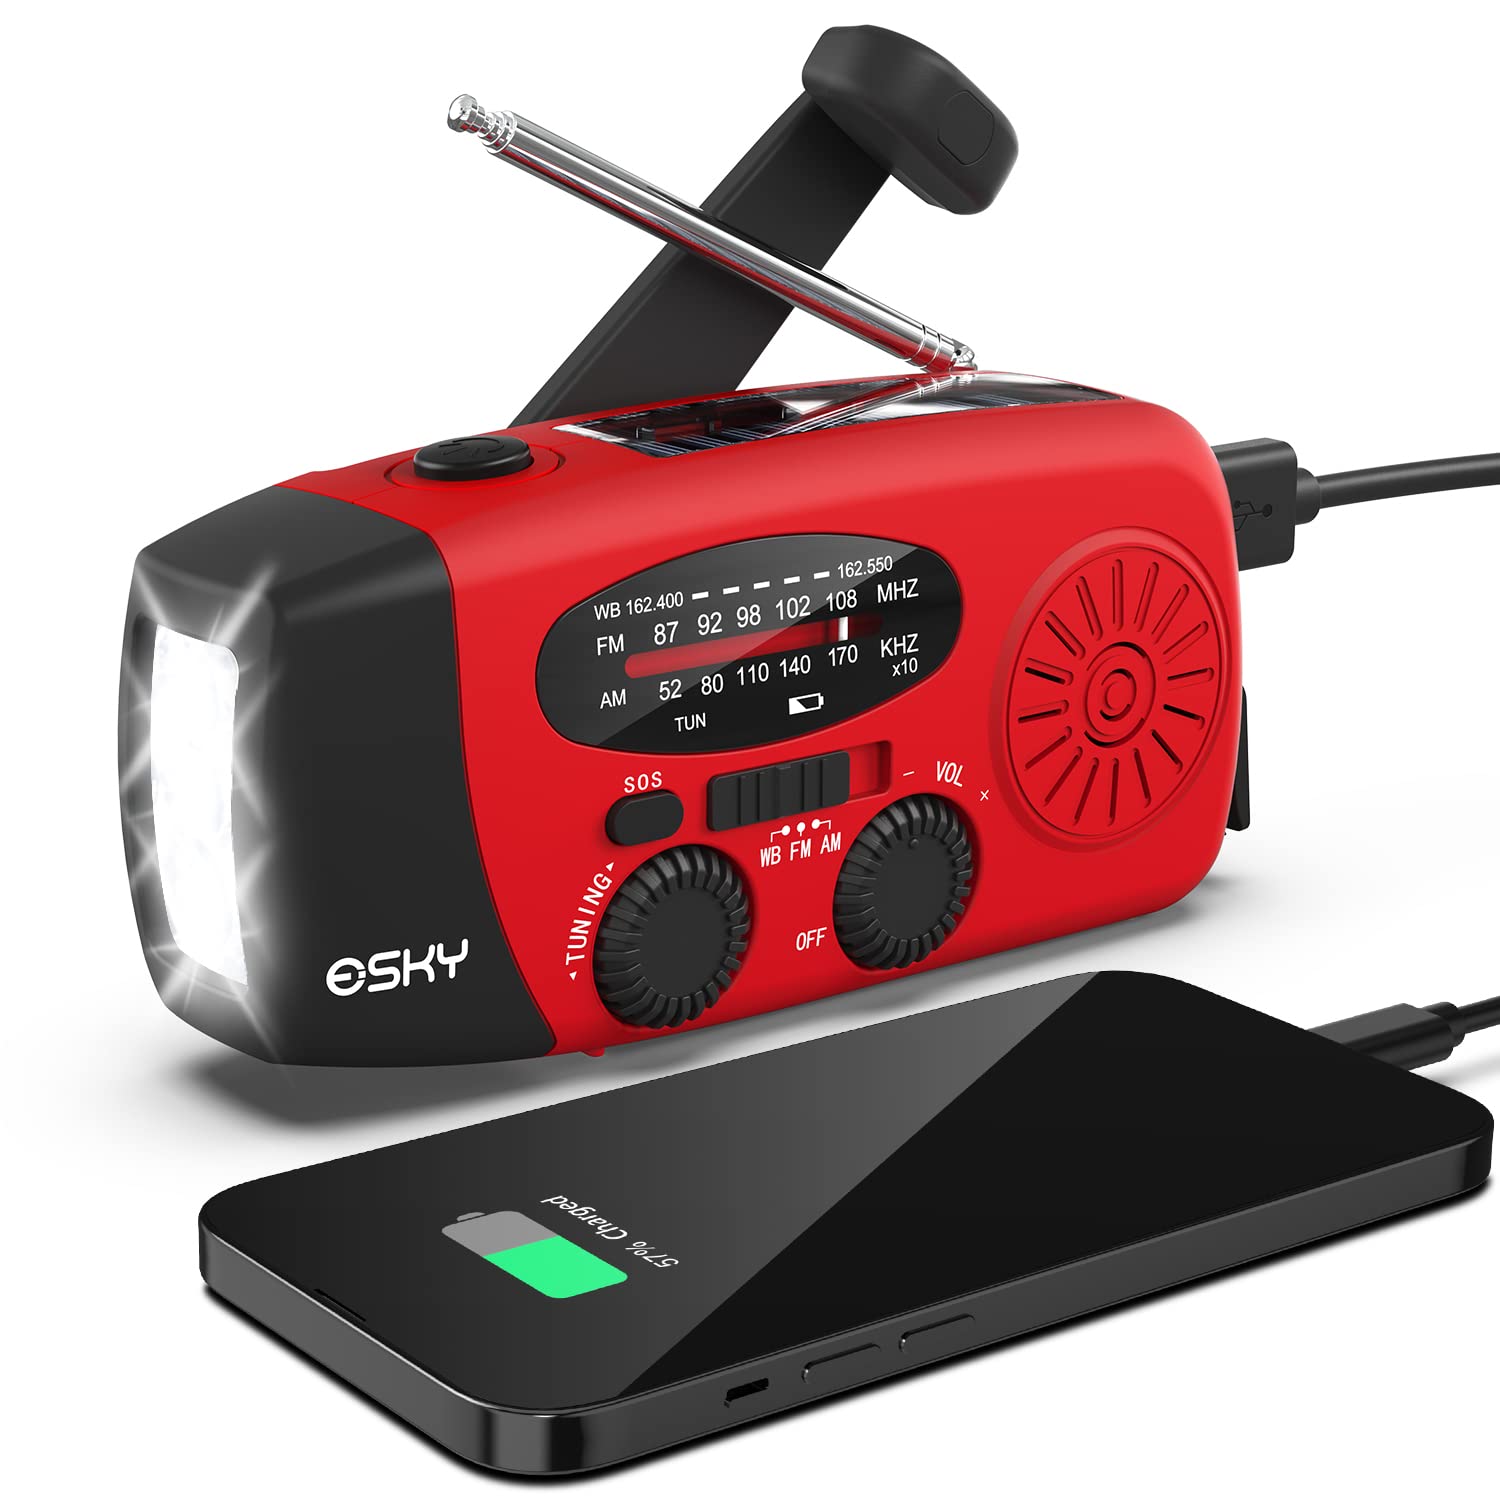 Emergency Hand Crank Radio with 3 LED Flashlight, Esky AM/FM/NOAA Portable Weather Radio with 2000mAh Power Bank Phone Charger, Solar Powered USB Charged Radio for Indoor Outdoor Camping, SOS Alarm